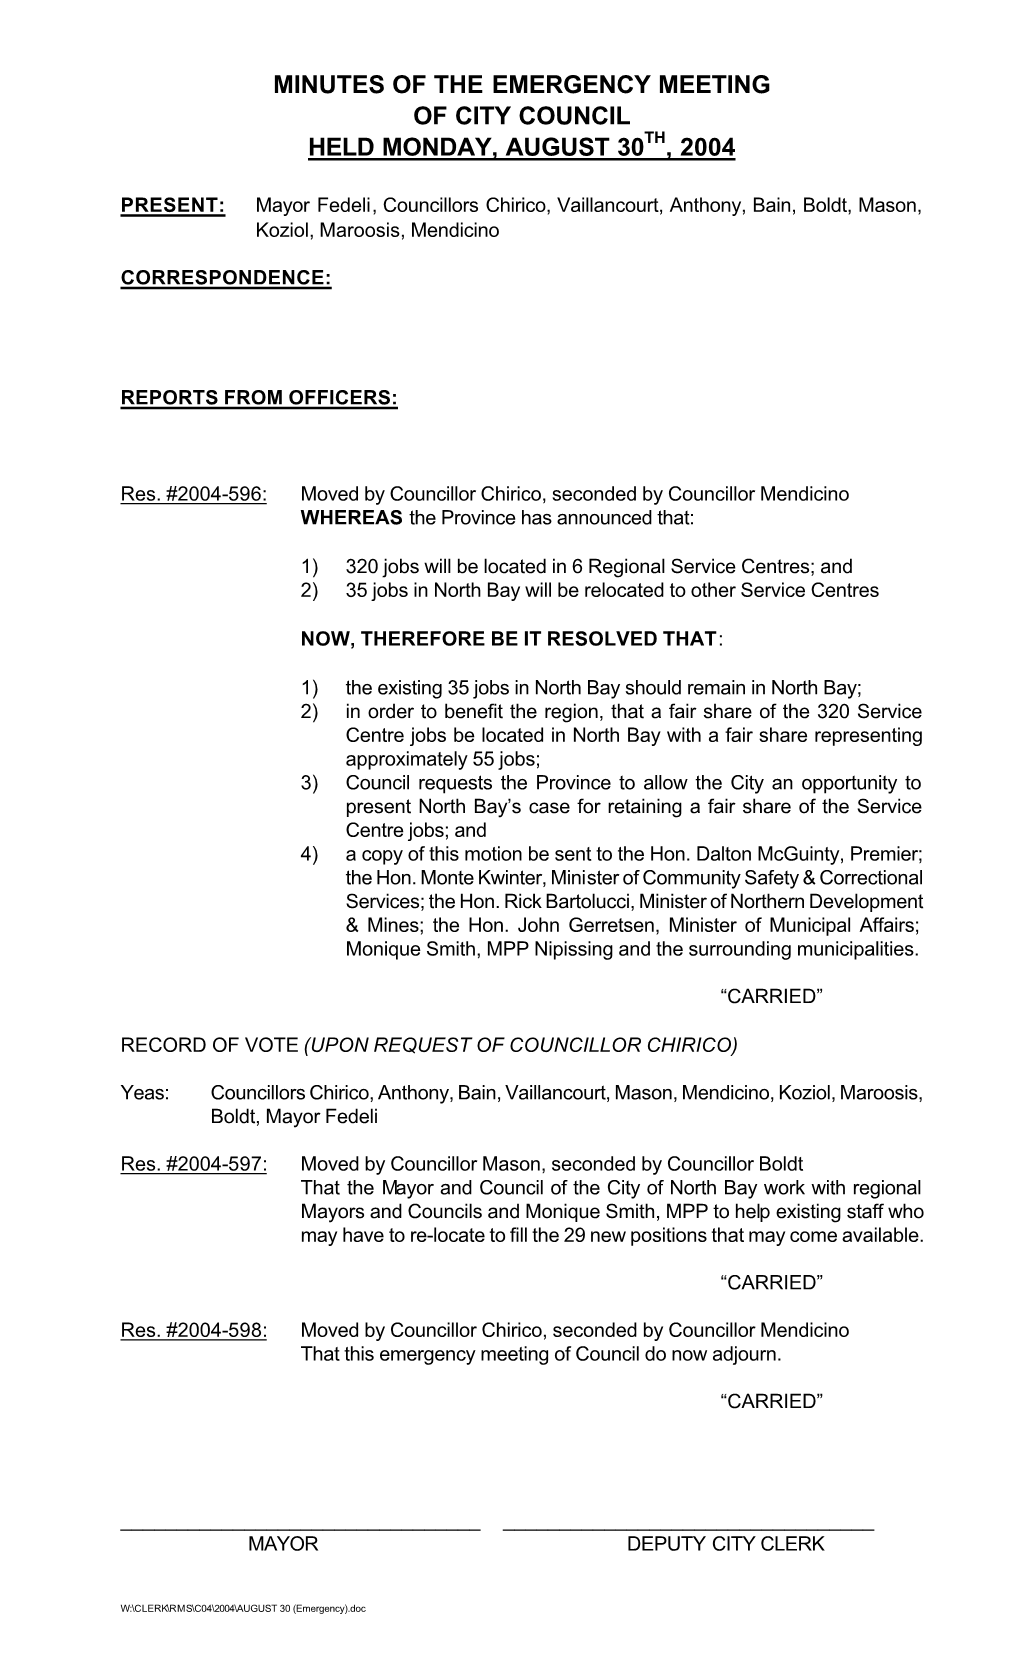 Minutes of the Emergency Meeting of City Council Held Monday, August 30Th, 2004